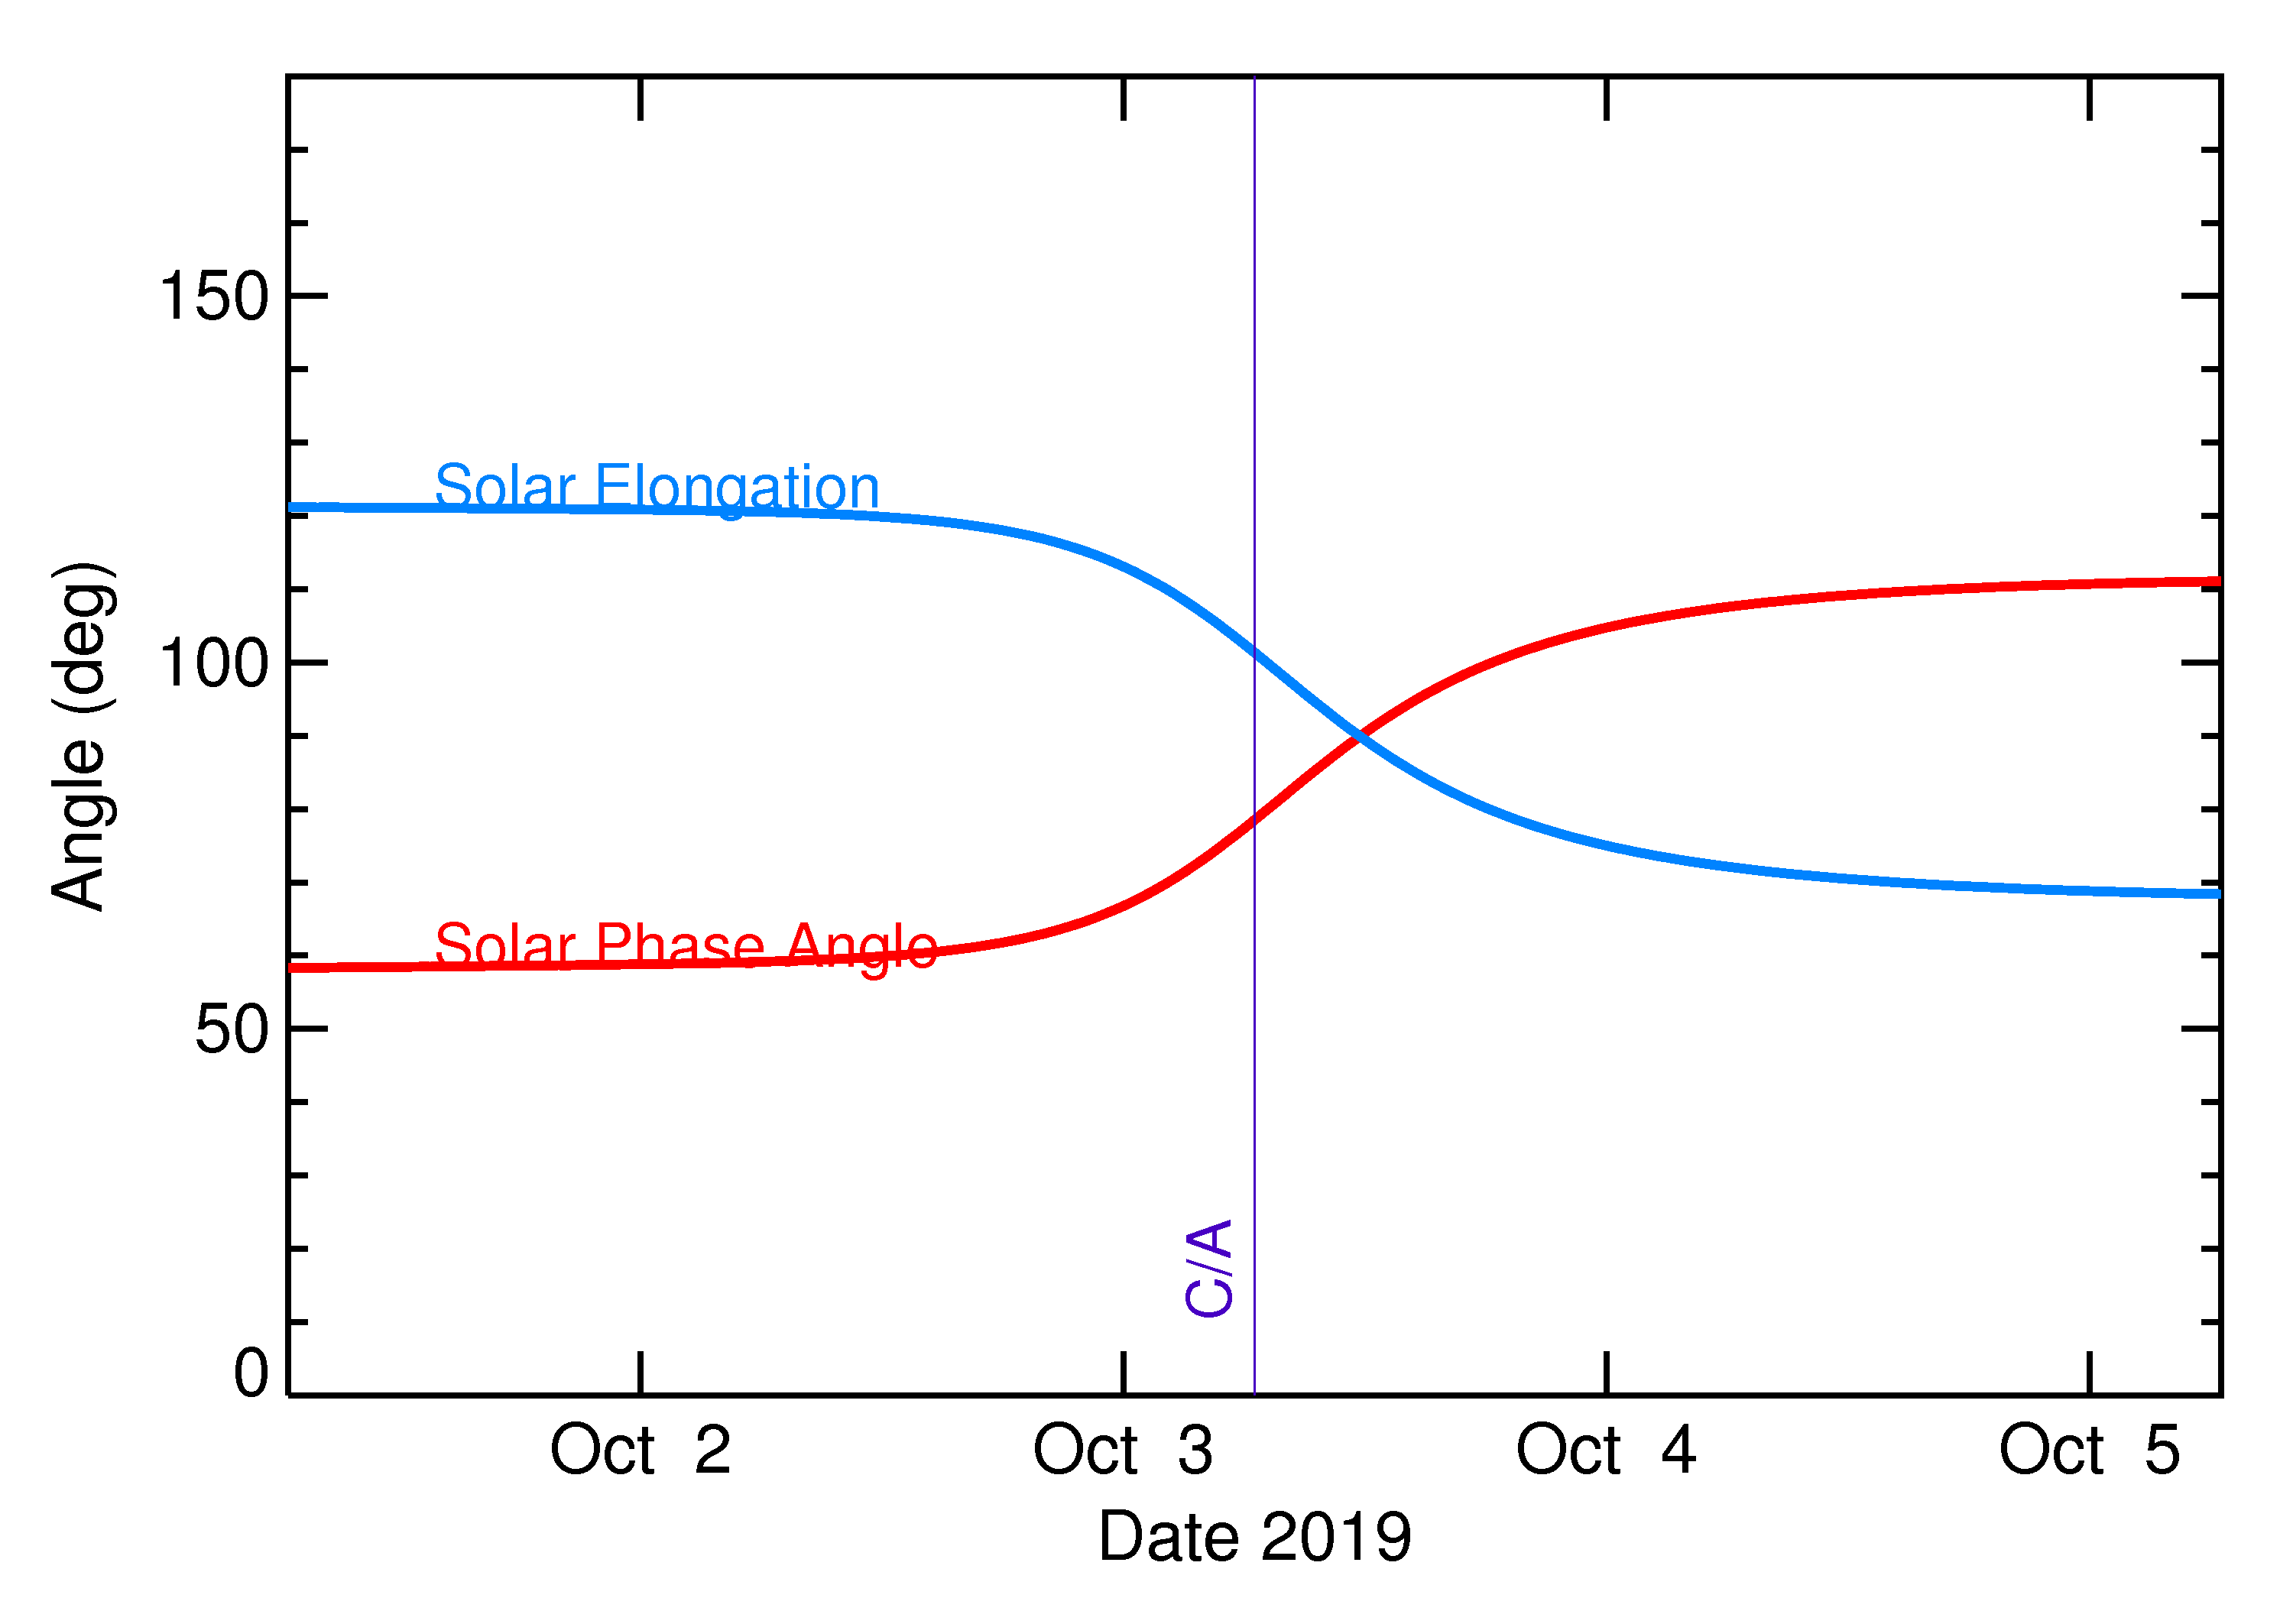 Solar Elongation and Solar Phase Angle of 2019 SP3 in the days around closest approach